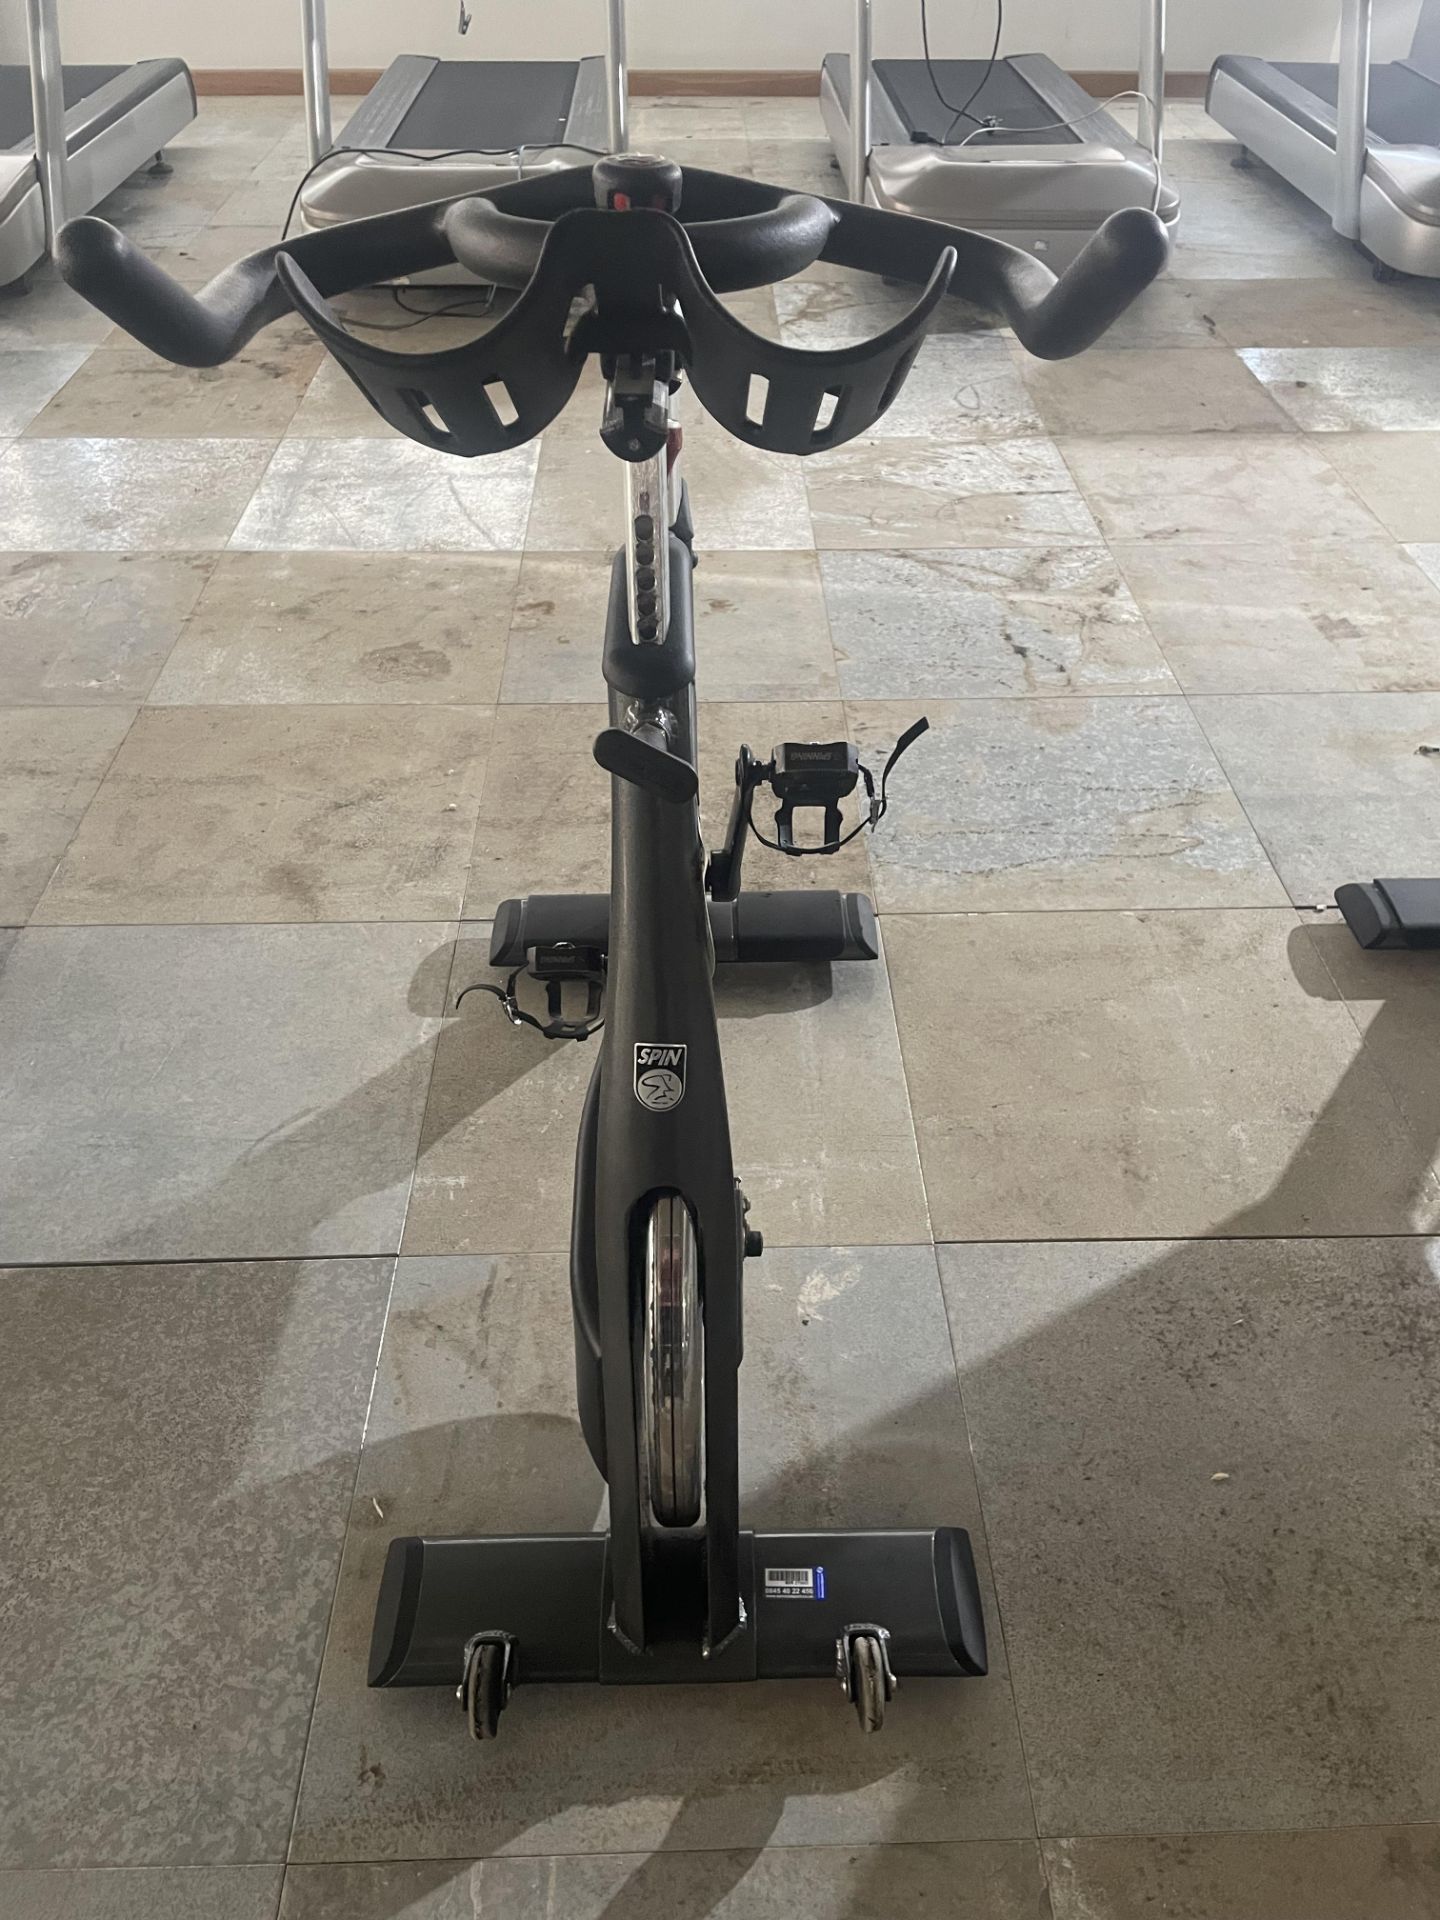 Star Trac Spinner Blade Indoor Exercise Bike - Image 2 of 5